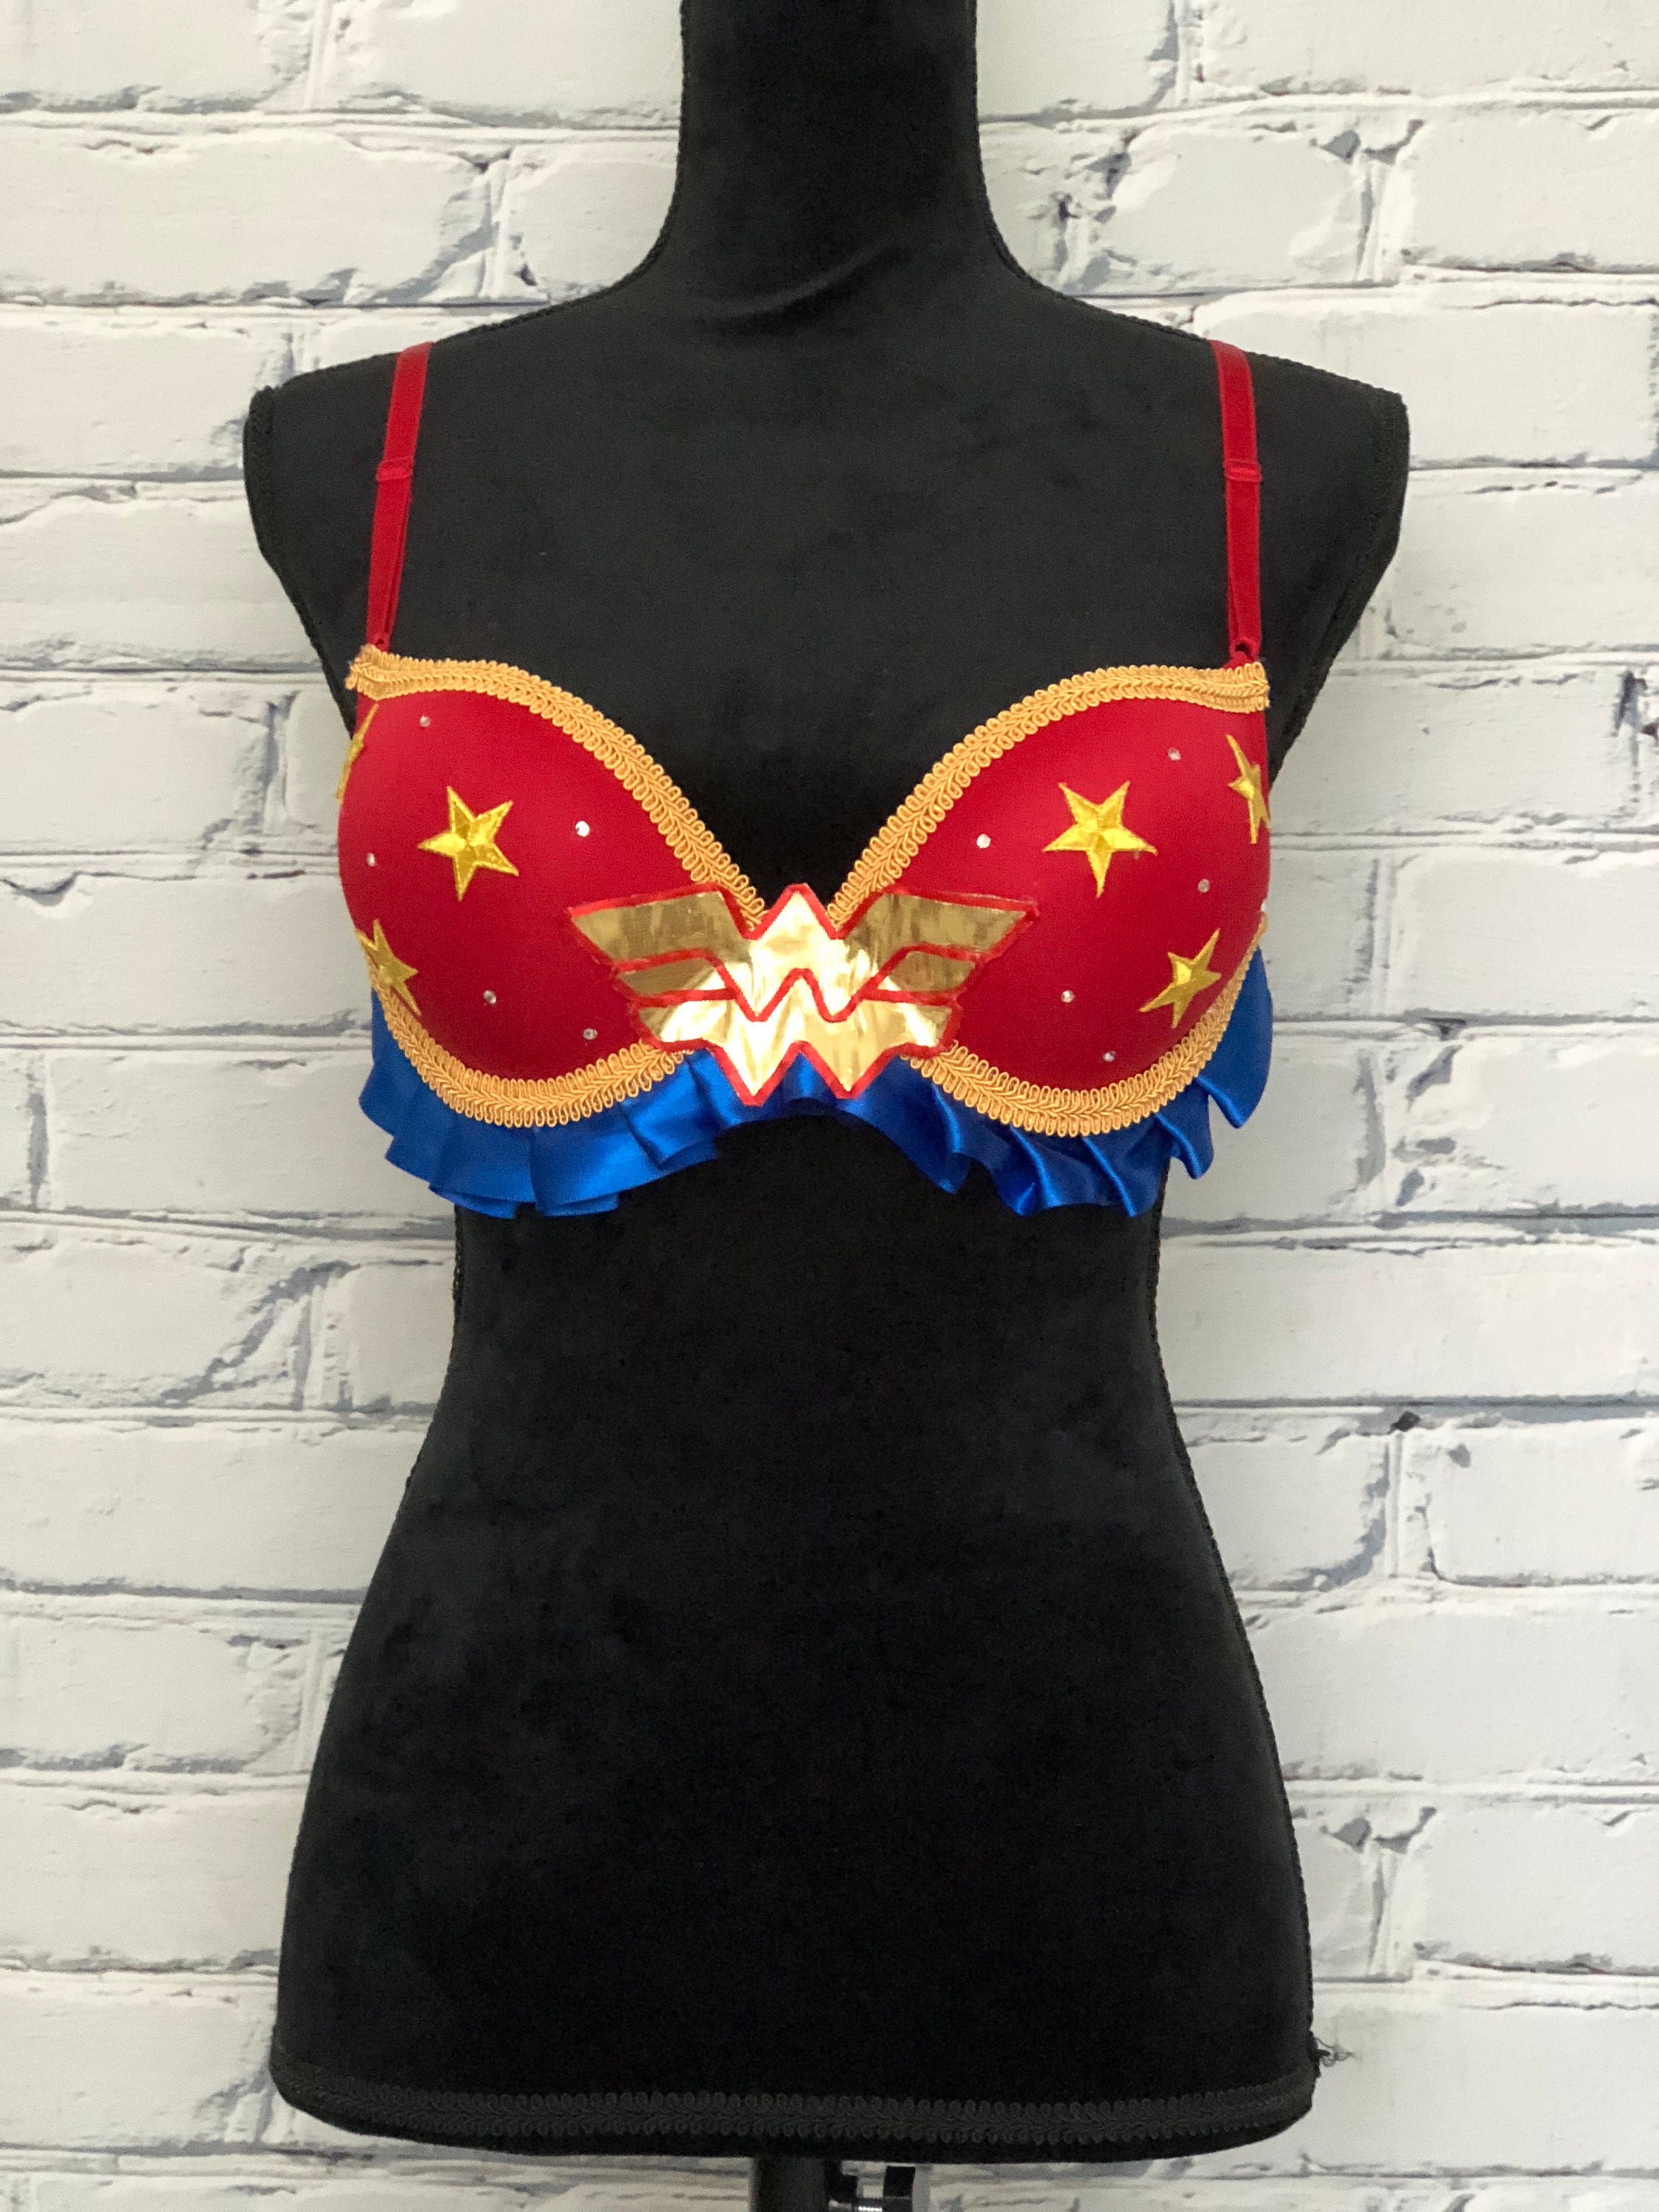 Wonder Woman Golden Lasso Inspired Rave Bra Perfect for Rave pic